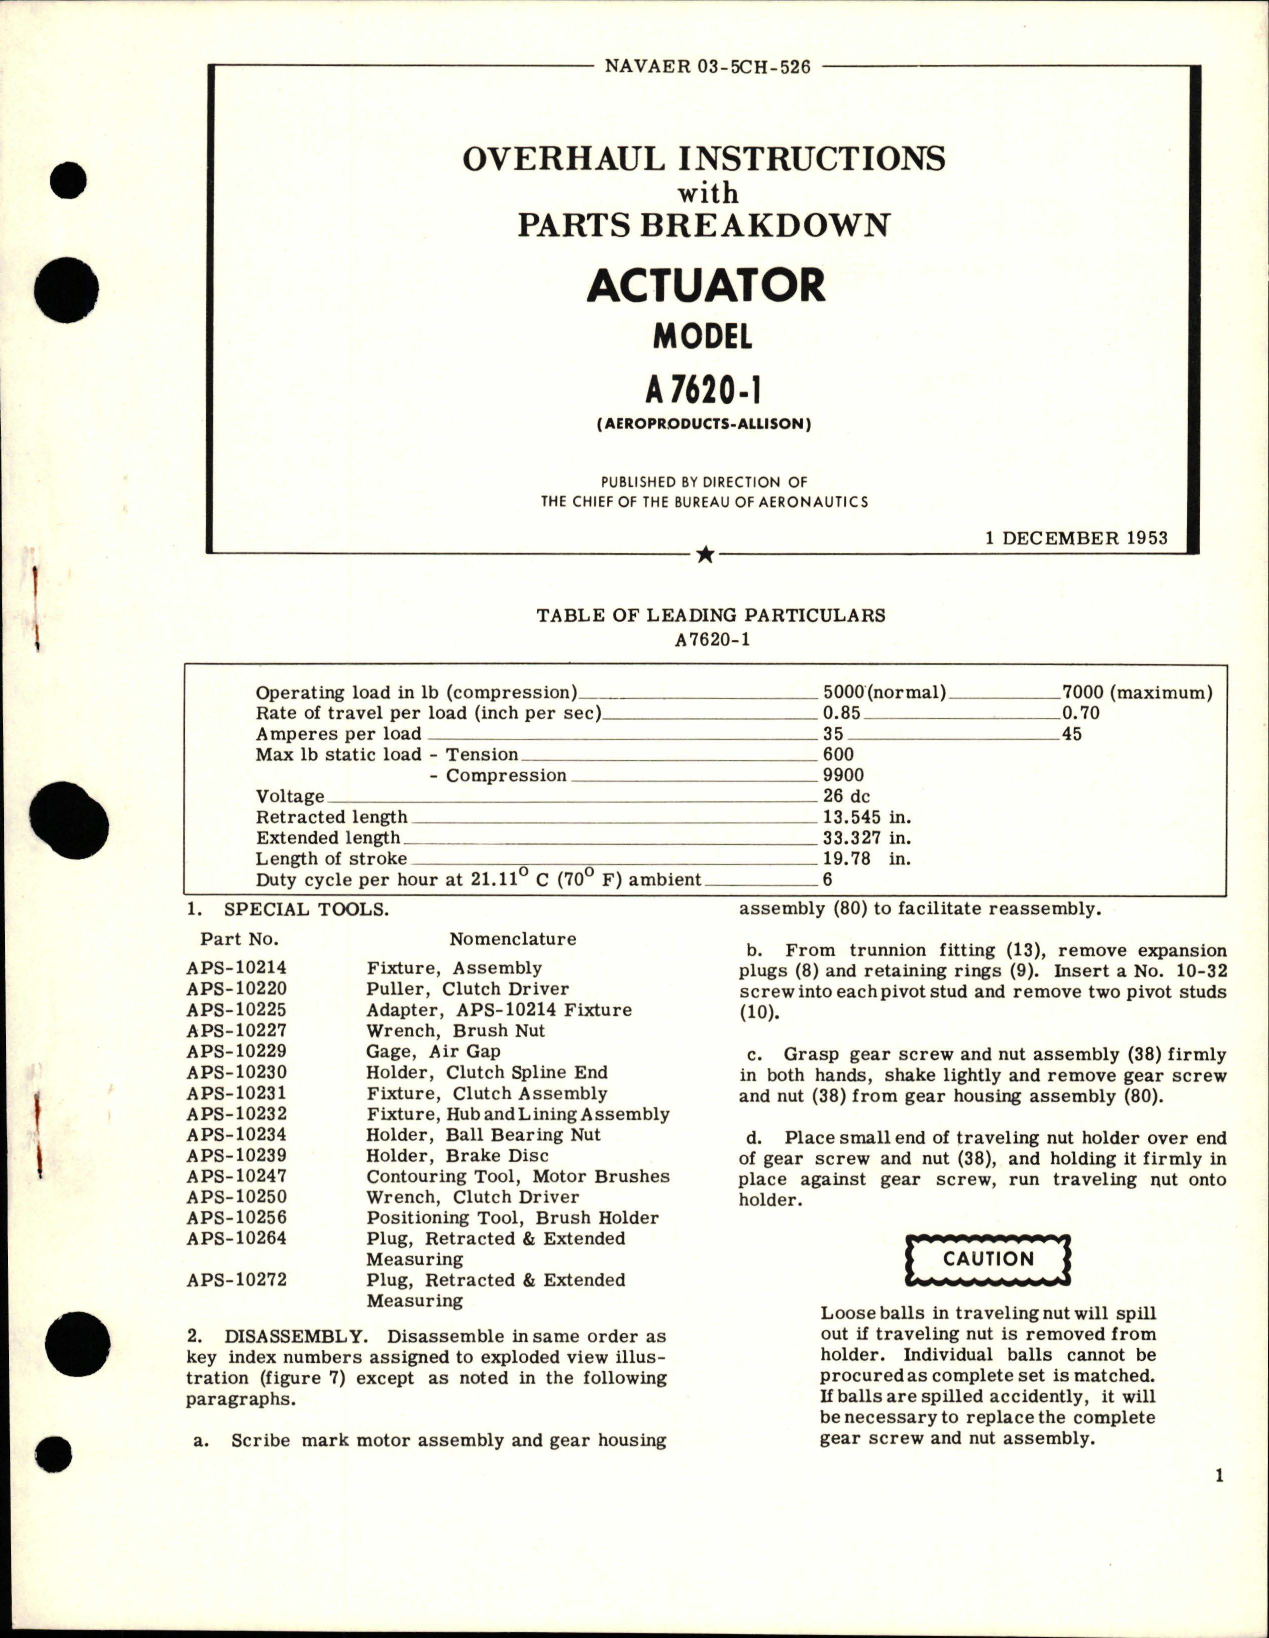 Sample page 1 from AirCorps Library document: Overhaul Instructions with Parts Breakdown for Actuator - Model A7620-1